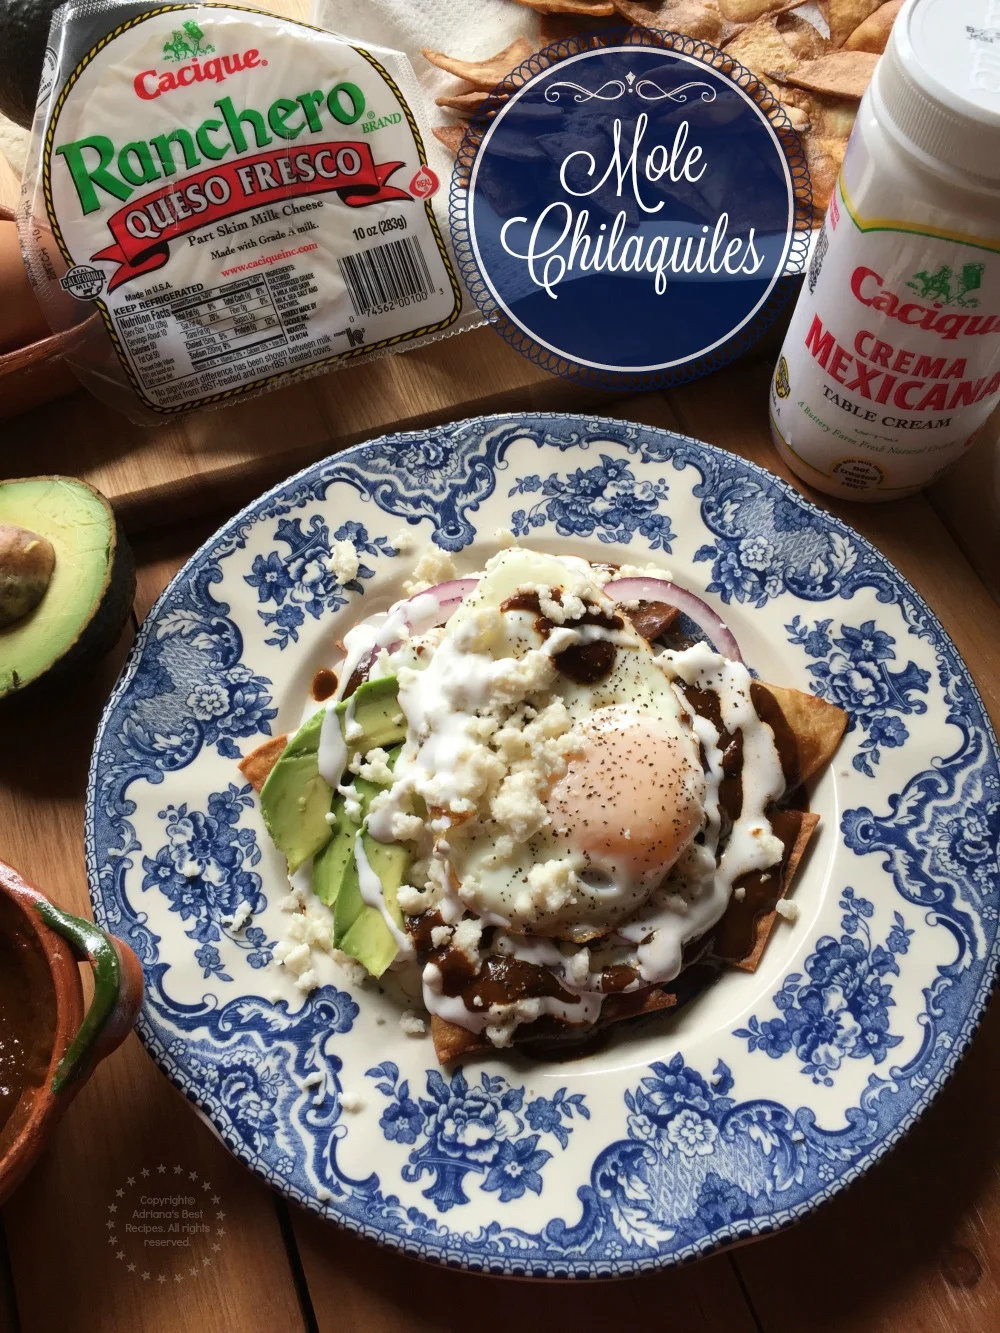 Mole Chilaquiles for Breakfast - Adriana's Best Recipes